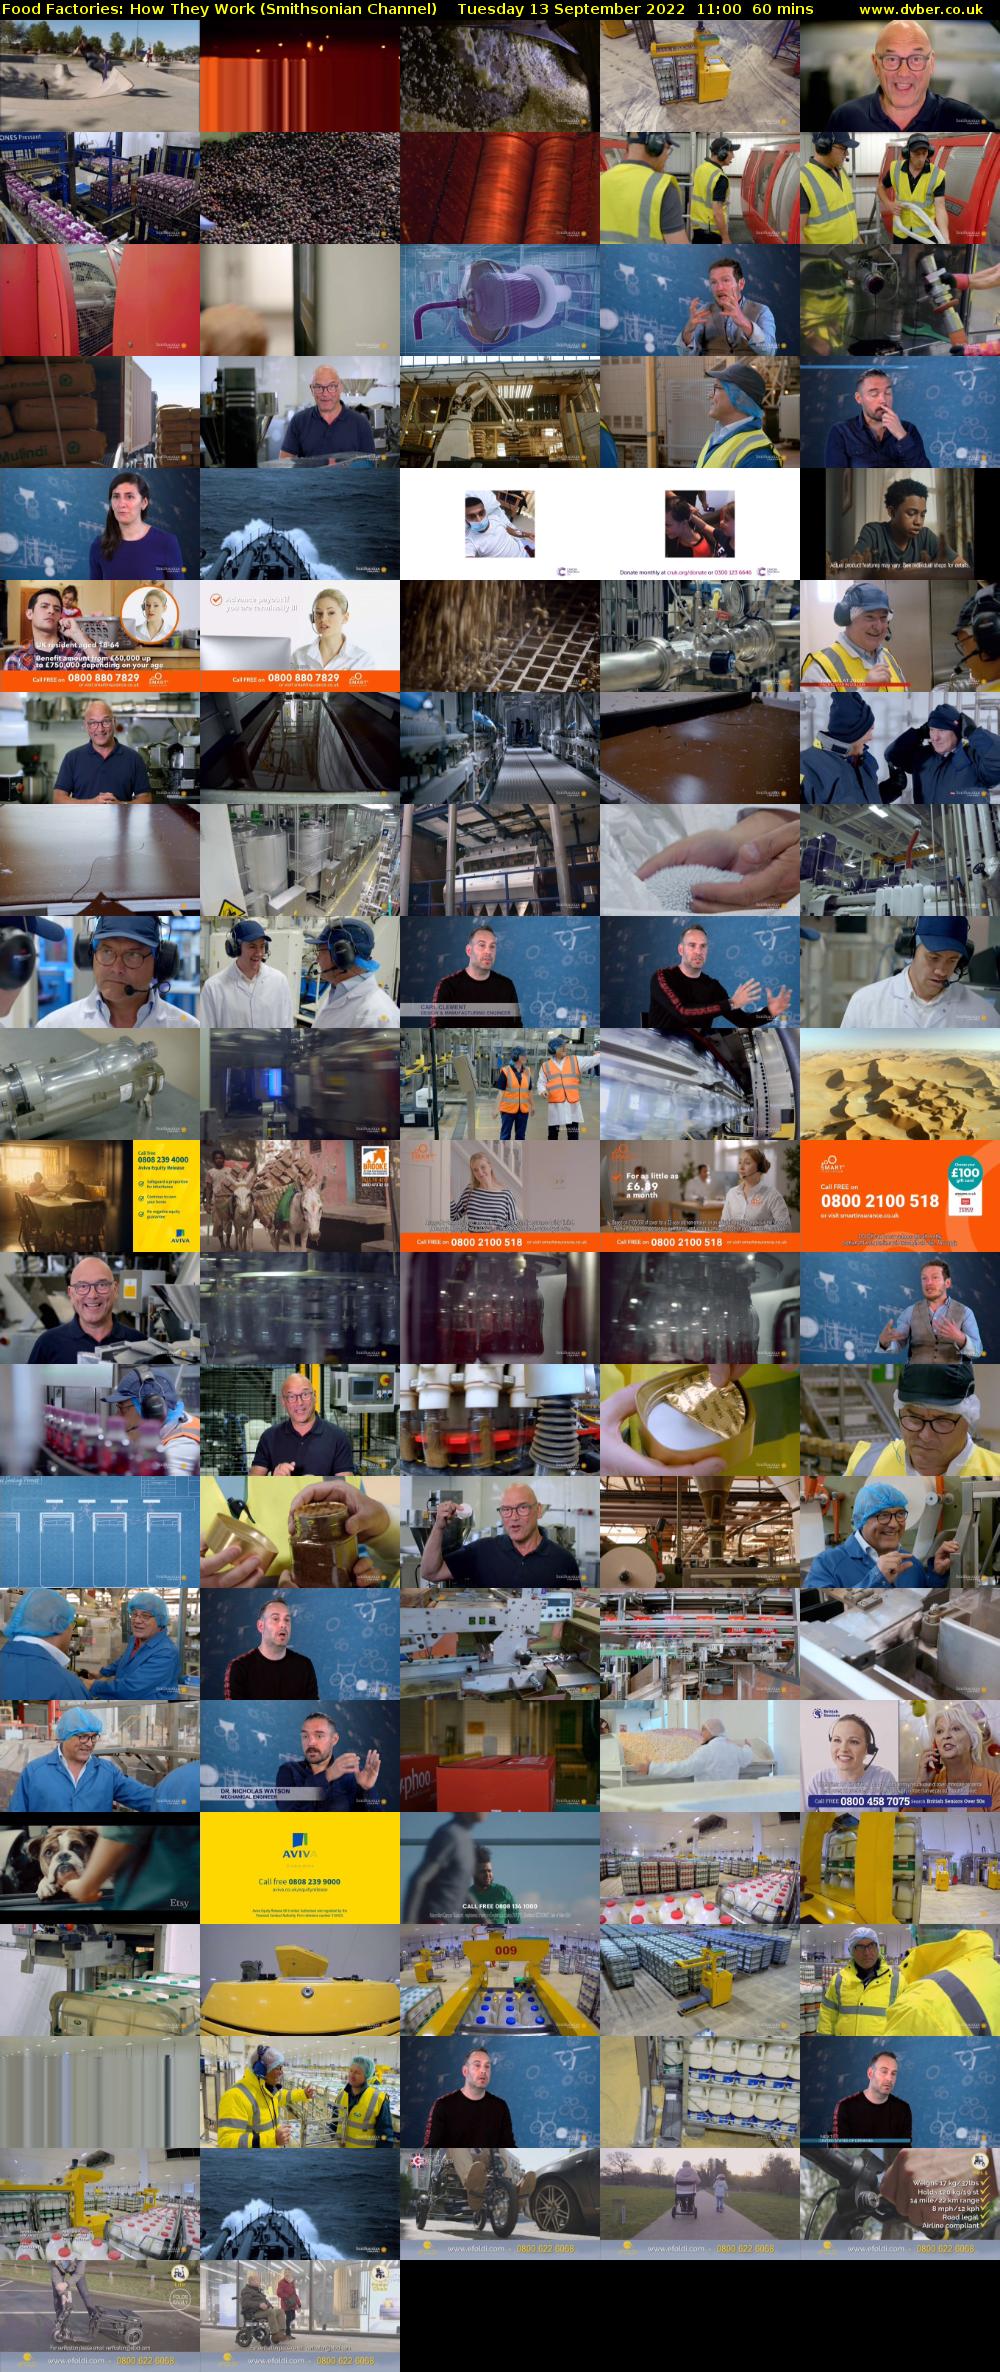 Food Factories: How They Work (Smithsonian Channel) Tuesday 13 September 2022 11:00 - 12:00